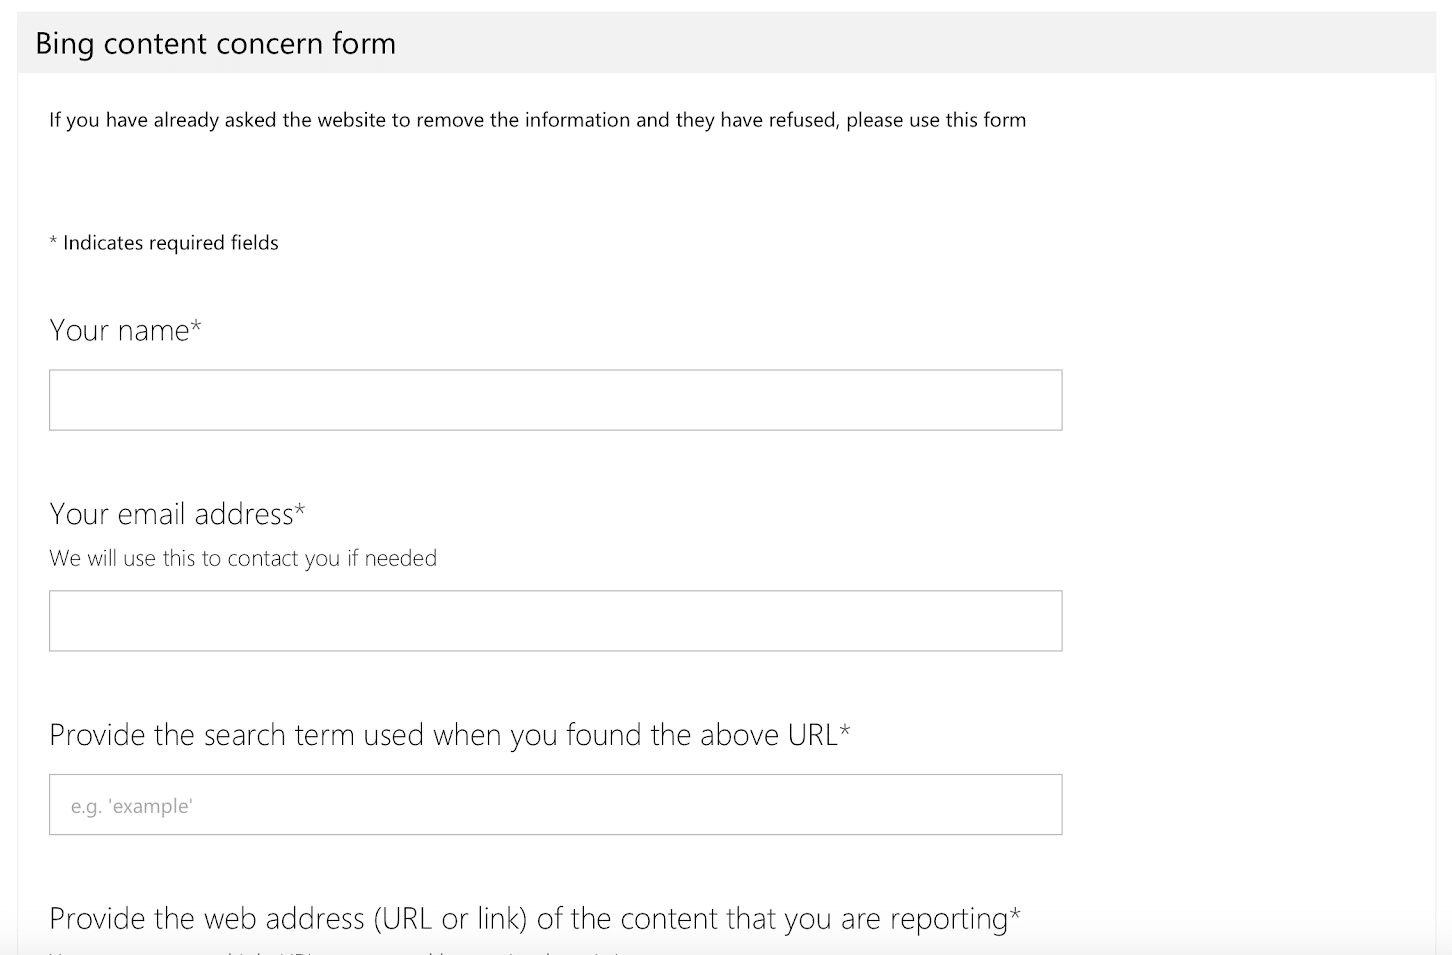 Bing Content Concern Form & submission